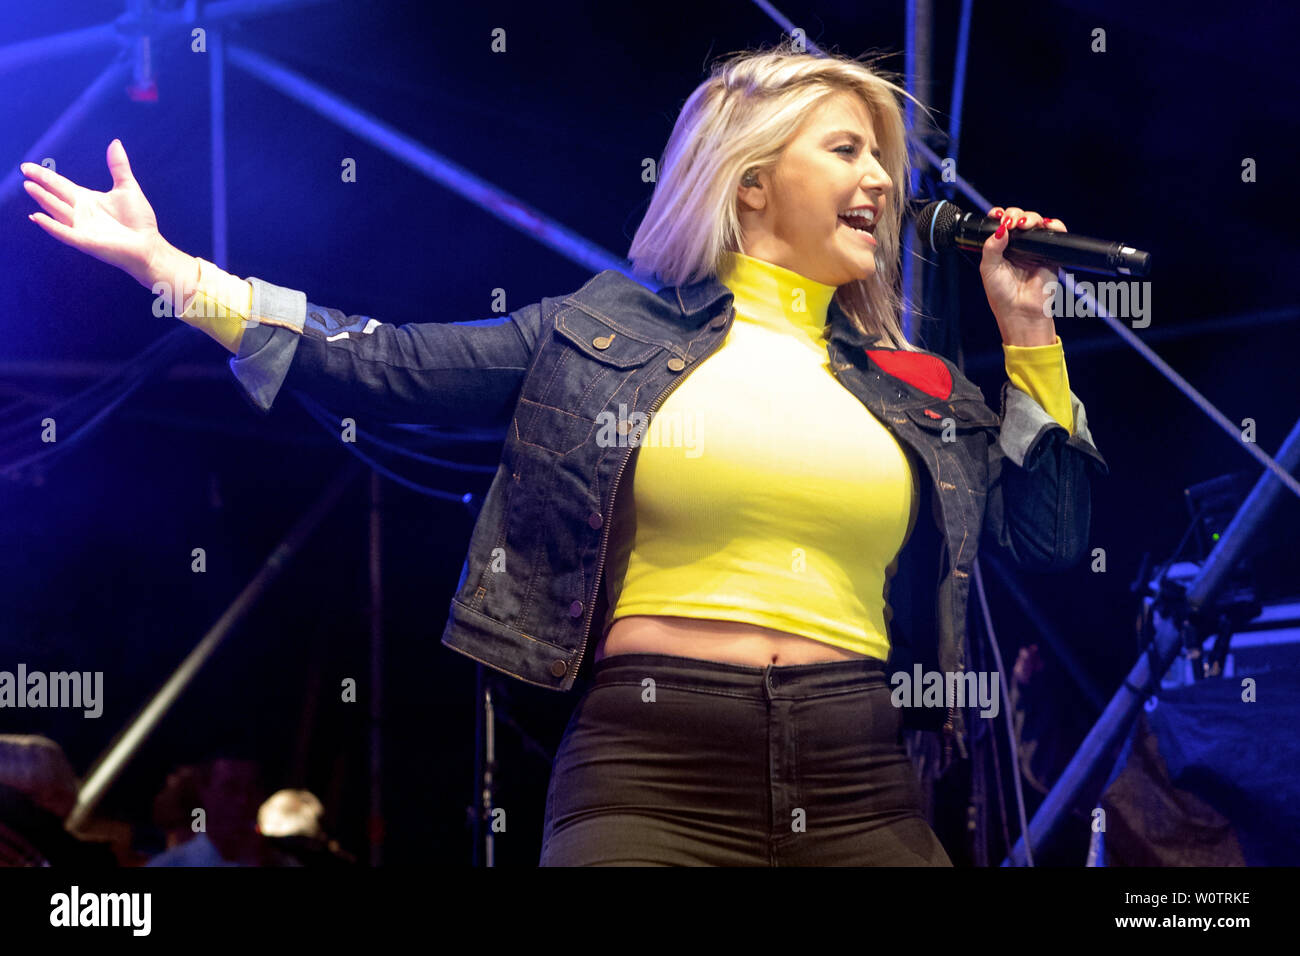 Beatrice Egli at the biggest hit Open Air in Berlin, the Schlagerolymp 2018 is now rising for the seventh time in Berlin's leisure and recreation park Lübars. Stock Photo